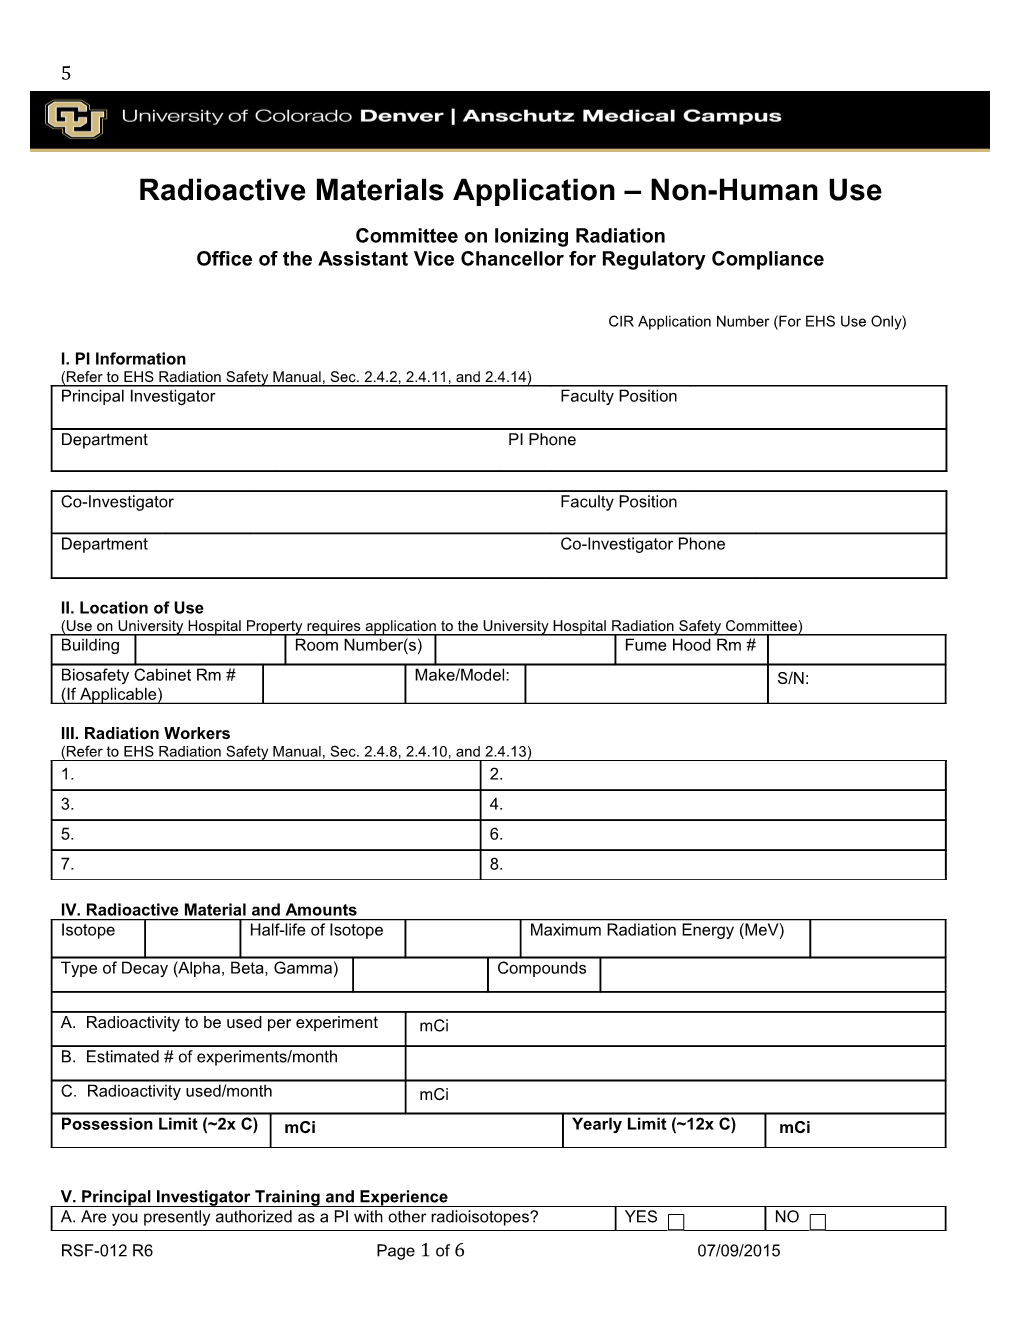 RAM App Non-Human Use RSF-012 R6